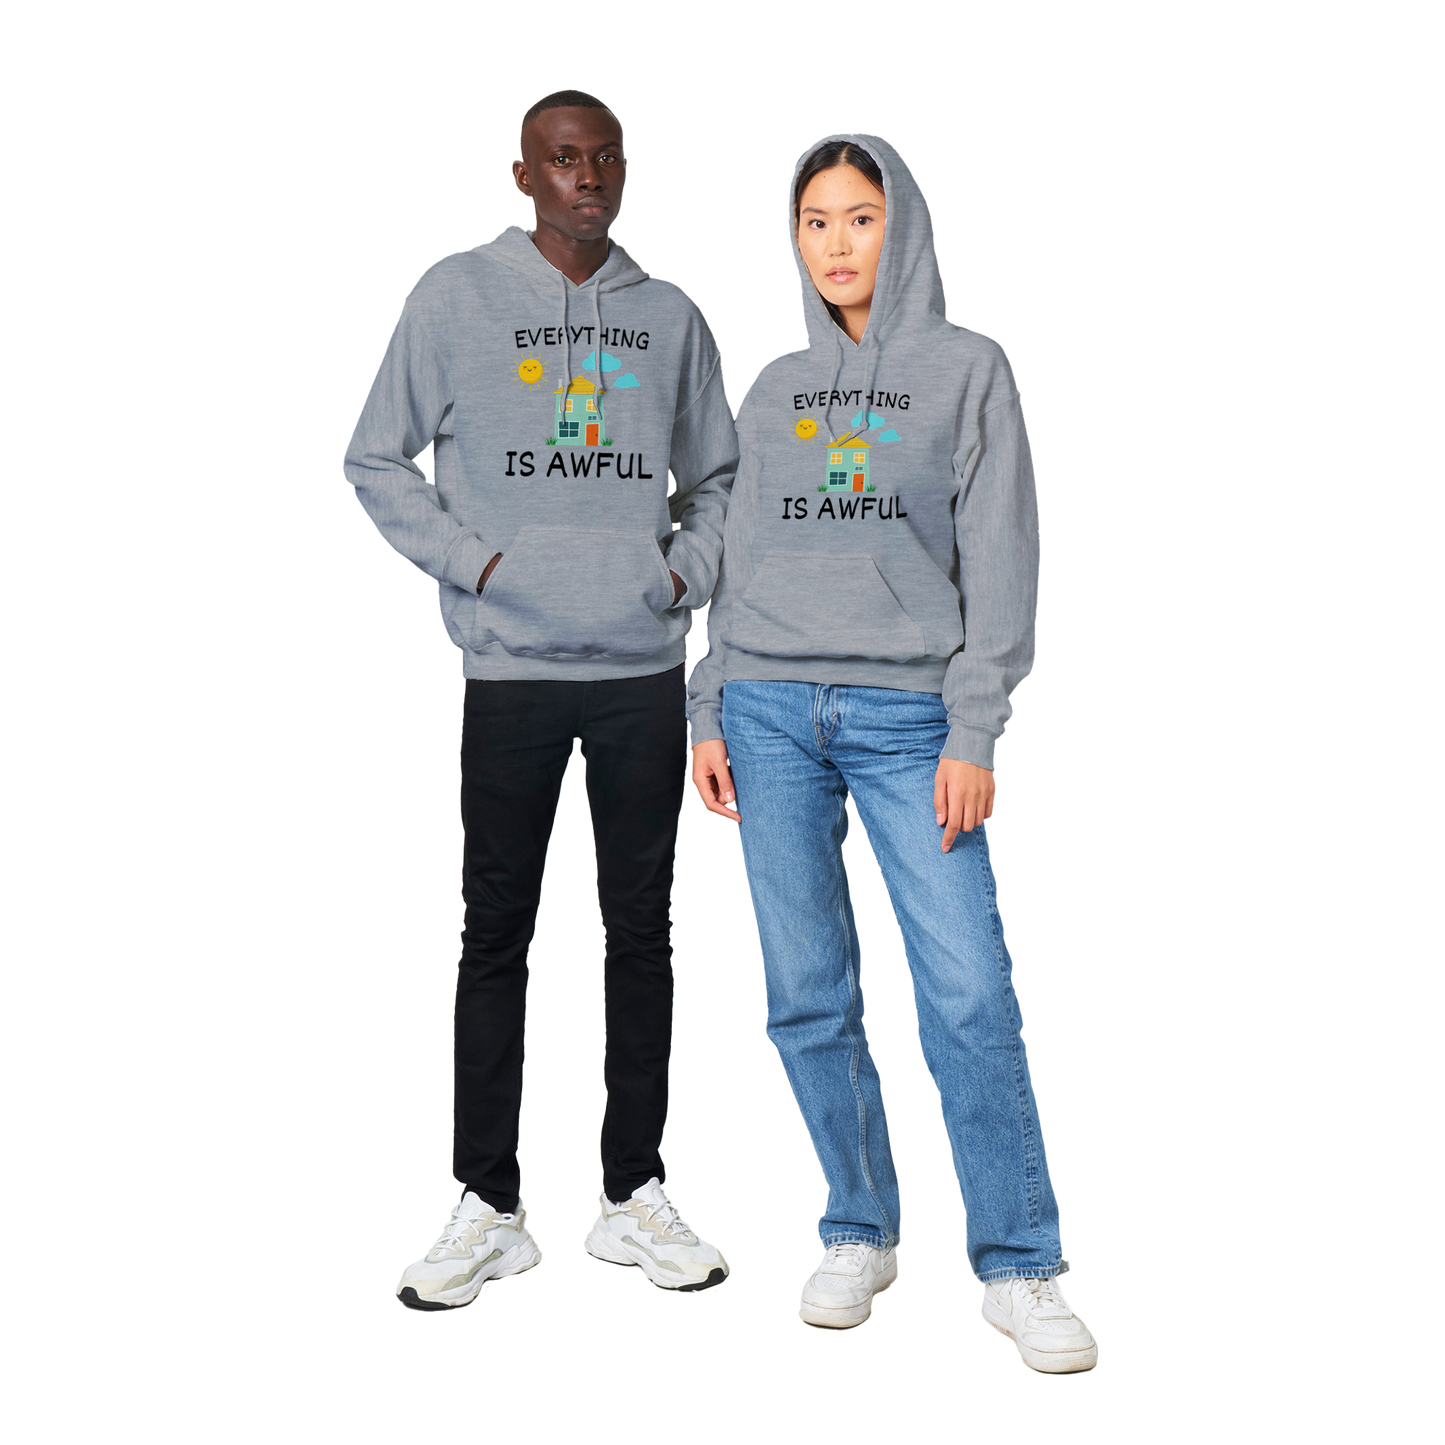 Everything is Awful - Classic Unisex Pullover Hoodie